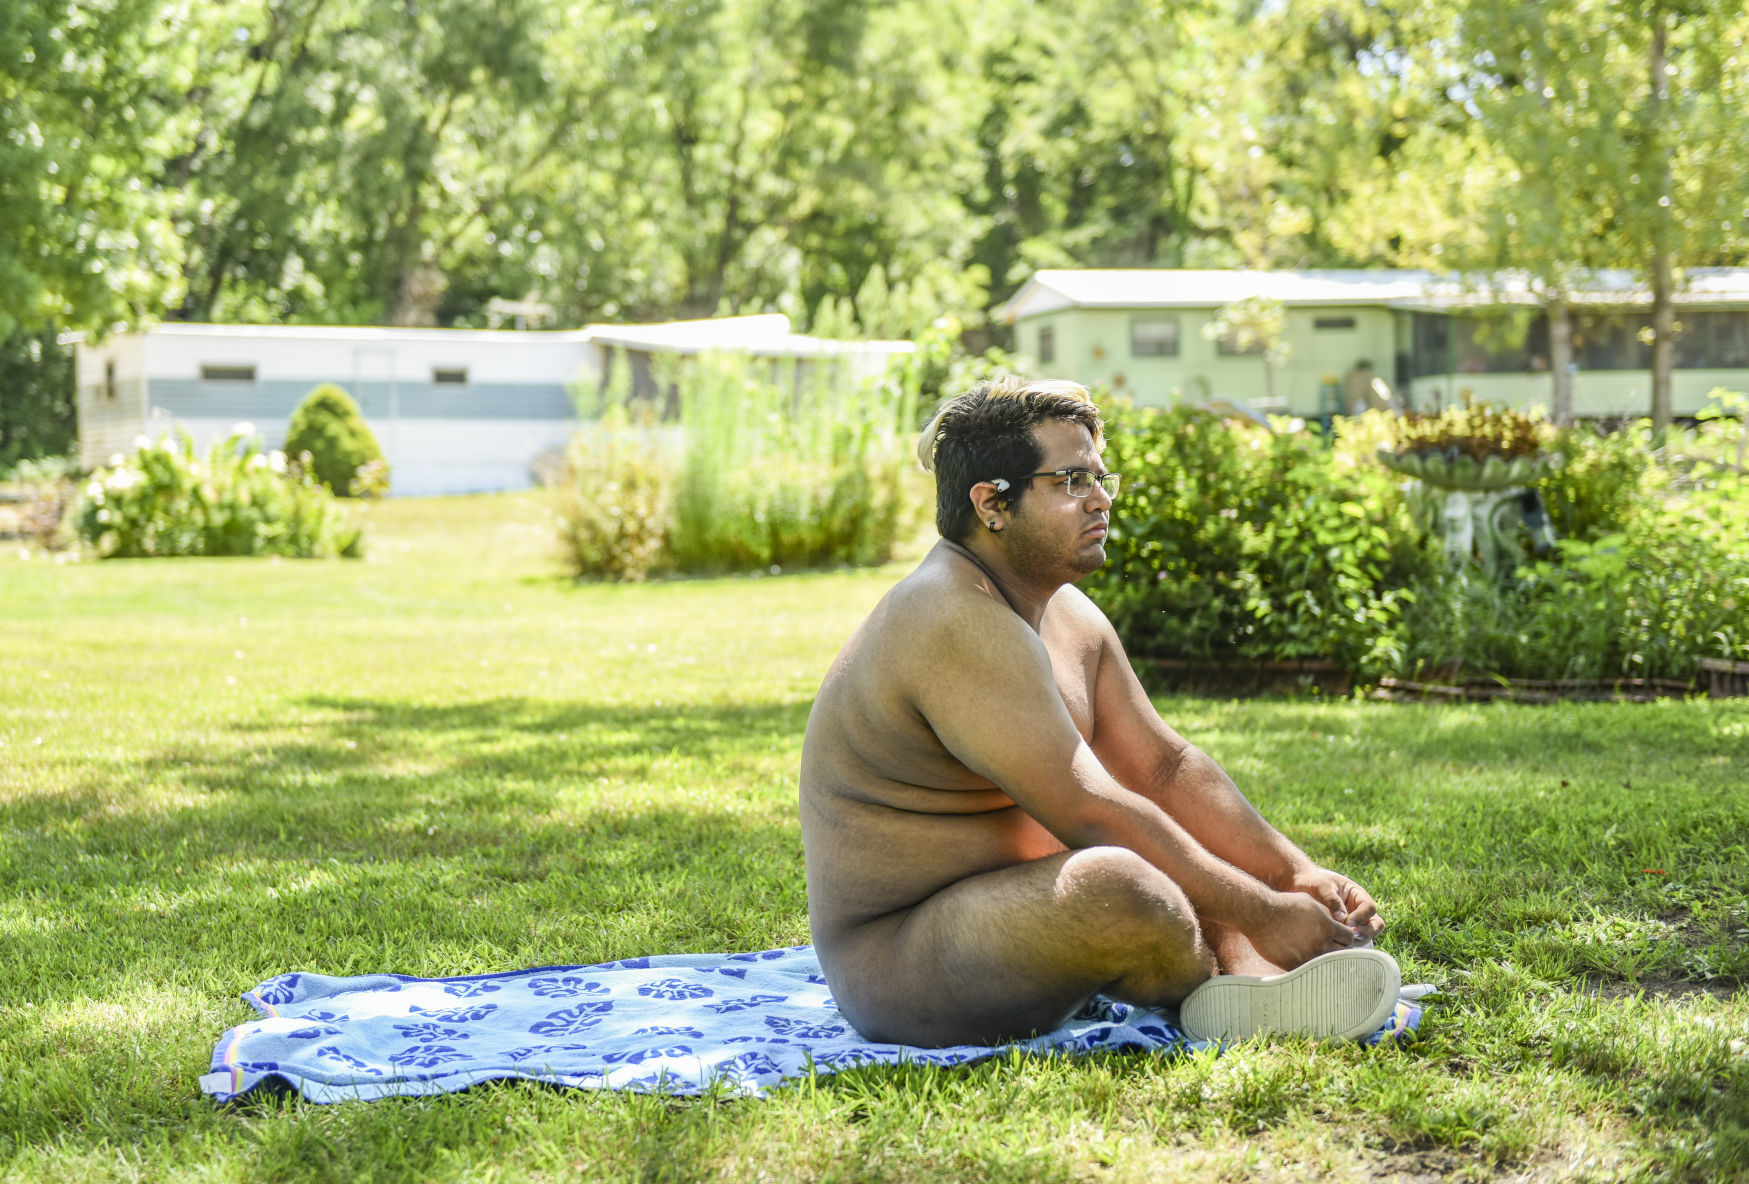 A nudist camp in the rural Quad-Cities has long been an open secret